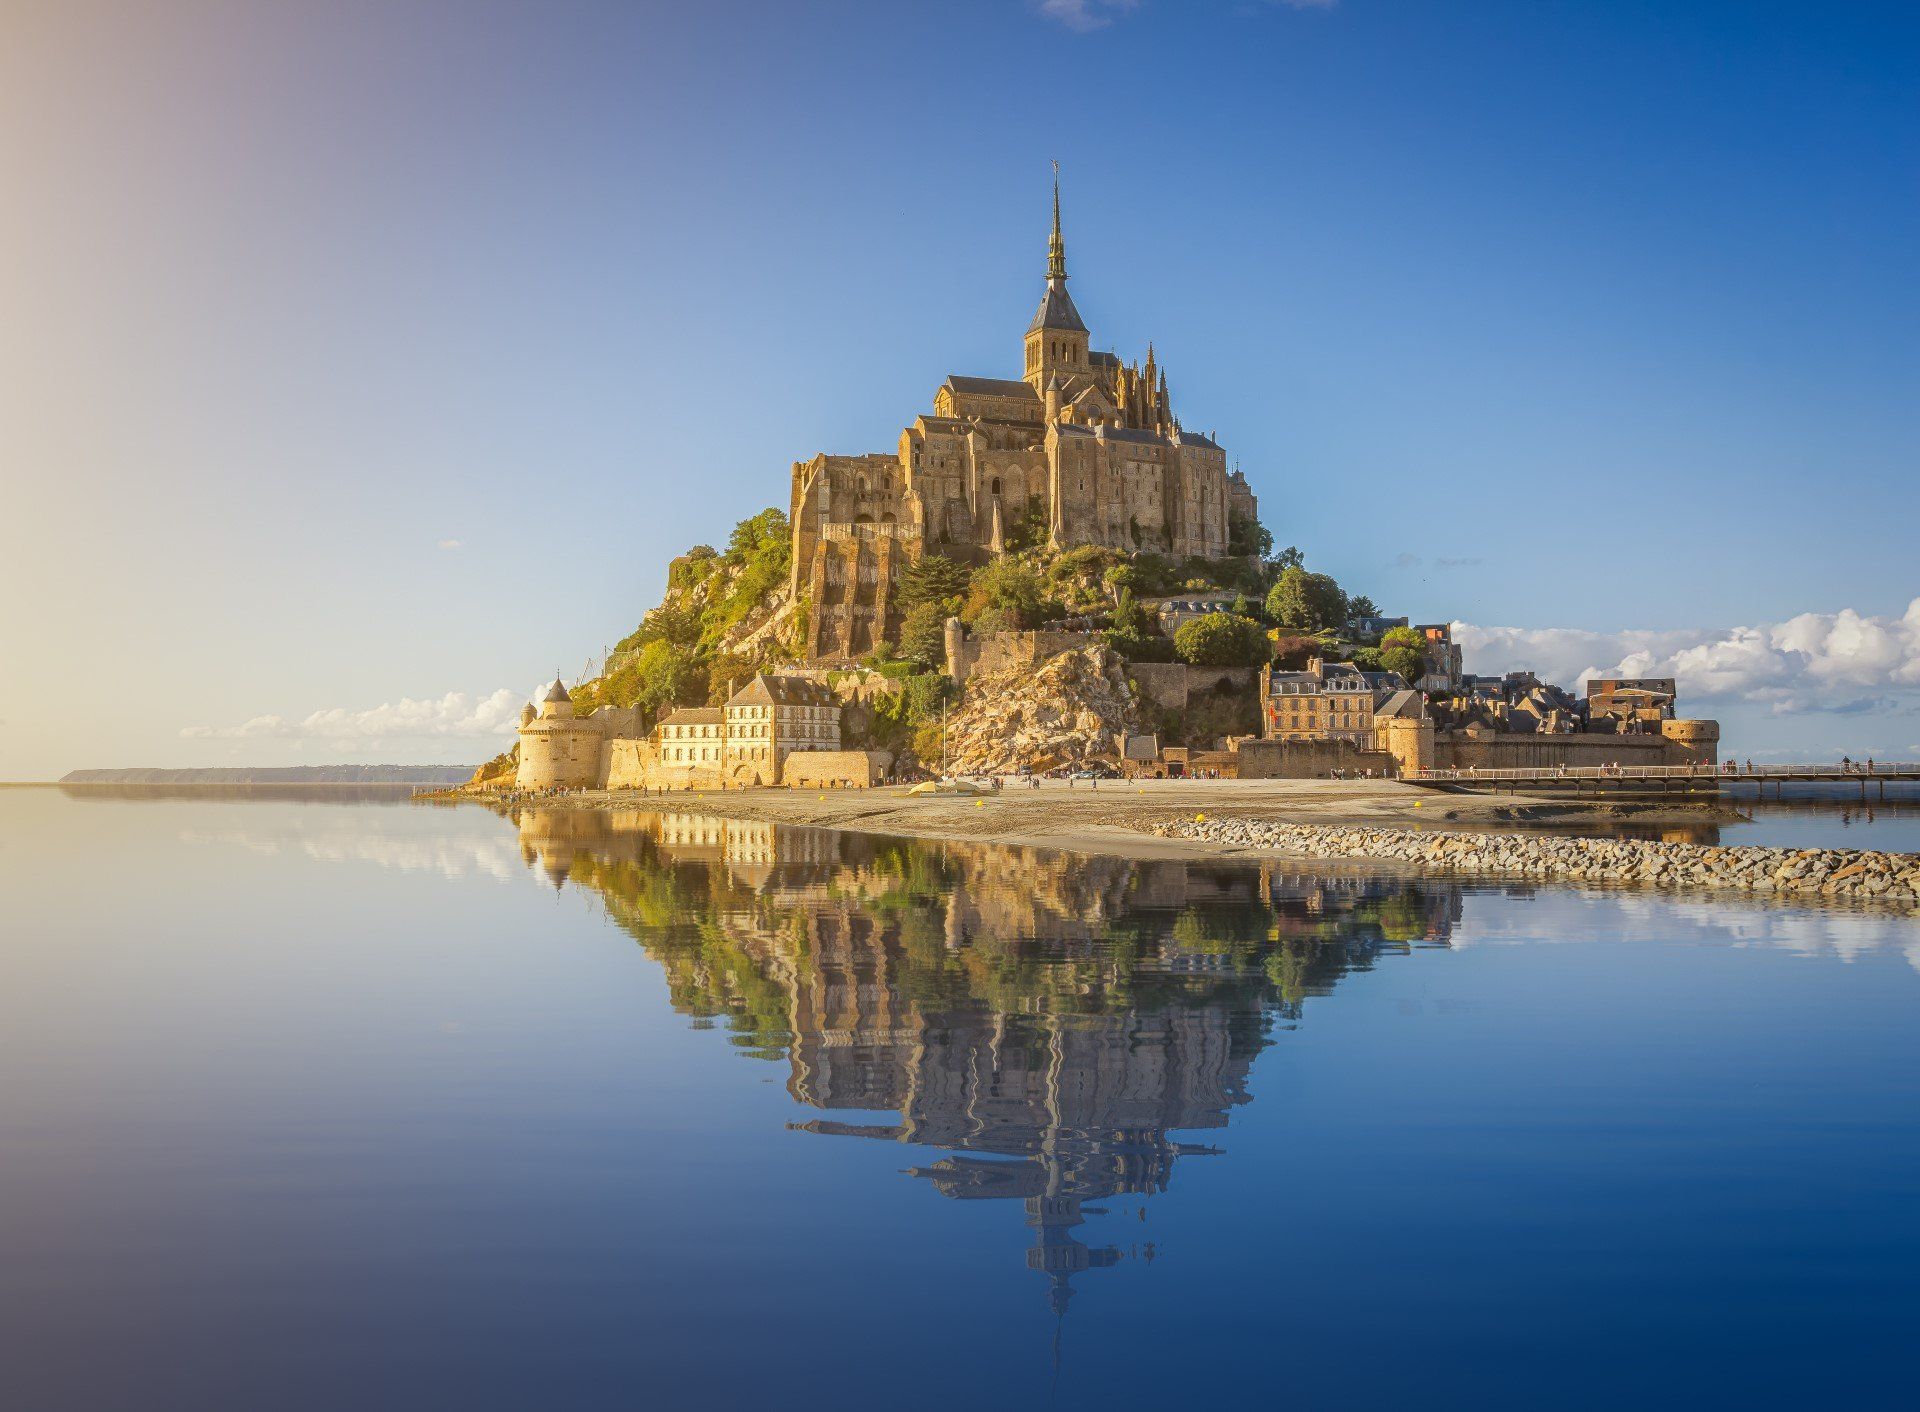  One of France's most important landmarks, Normandy's Mont-Saint-Michel was declared a UNESCO World Heritage Site